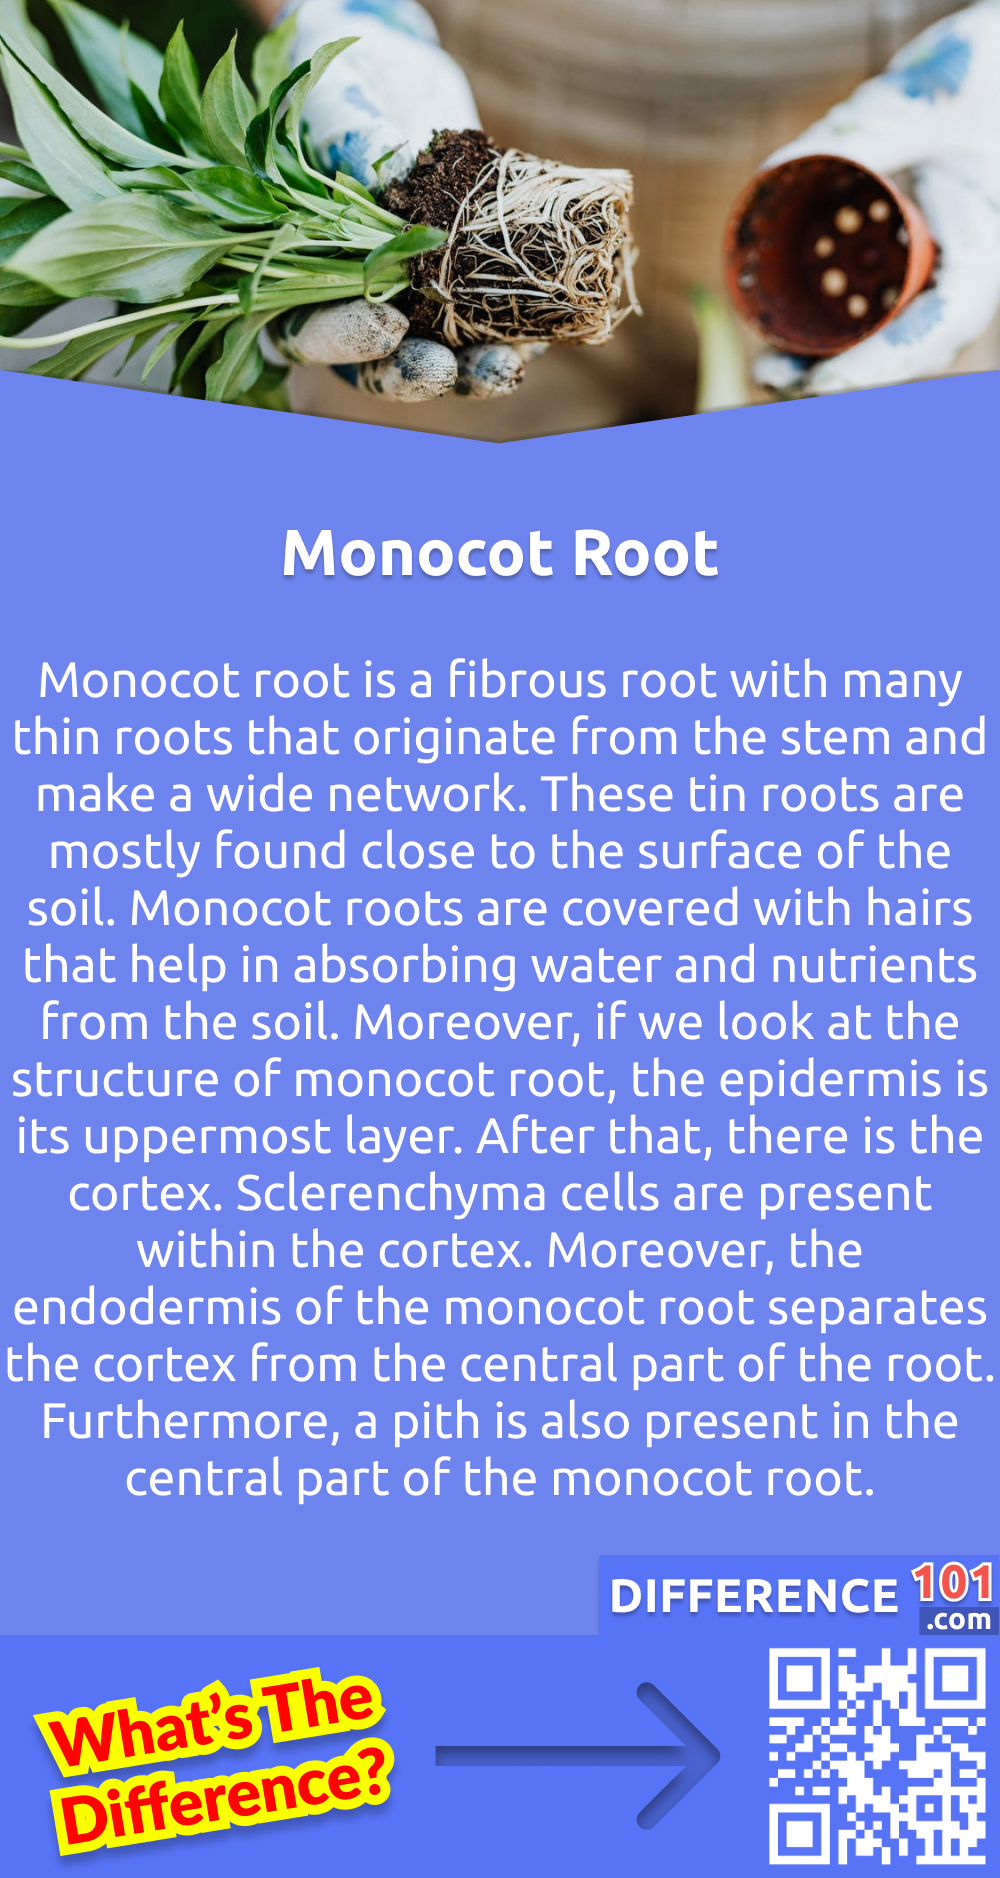 What Is Monocot Root? Monocot root is a fibrous root with many thin roots that originate from the stem and make a wide network. These tin roots are mostly found close to the surface of the soil. Monocot roots are covered with hairs that help in absorbing water and nutrients from the soil. Moreover, if we look at the structure of monocot root, the epidermis is its uppermost layer. After that, there is the cortex. Sclerenchyma cells are present within the cortex. Moreover, the endodermis of the monocot root separates the cortex from the central part of the root. Furthermore, a pith is also present in the central part of the monocot root.